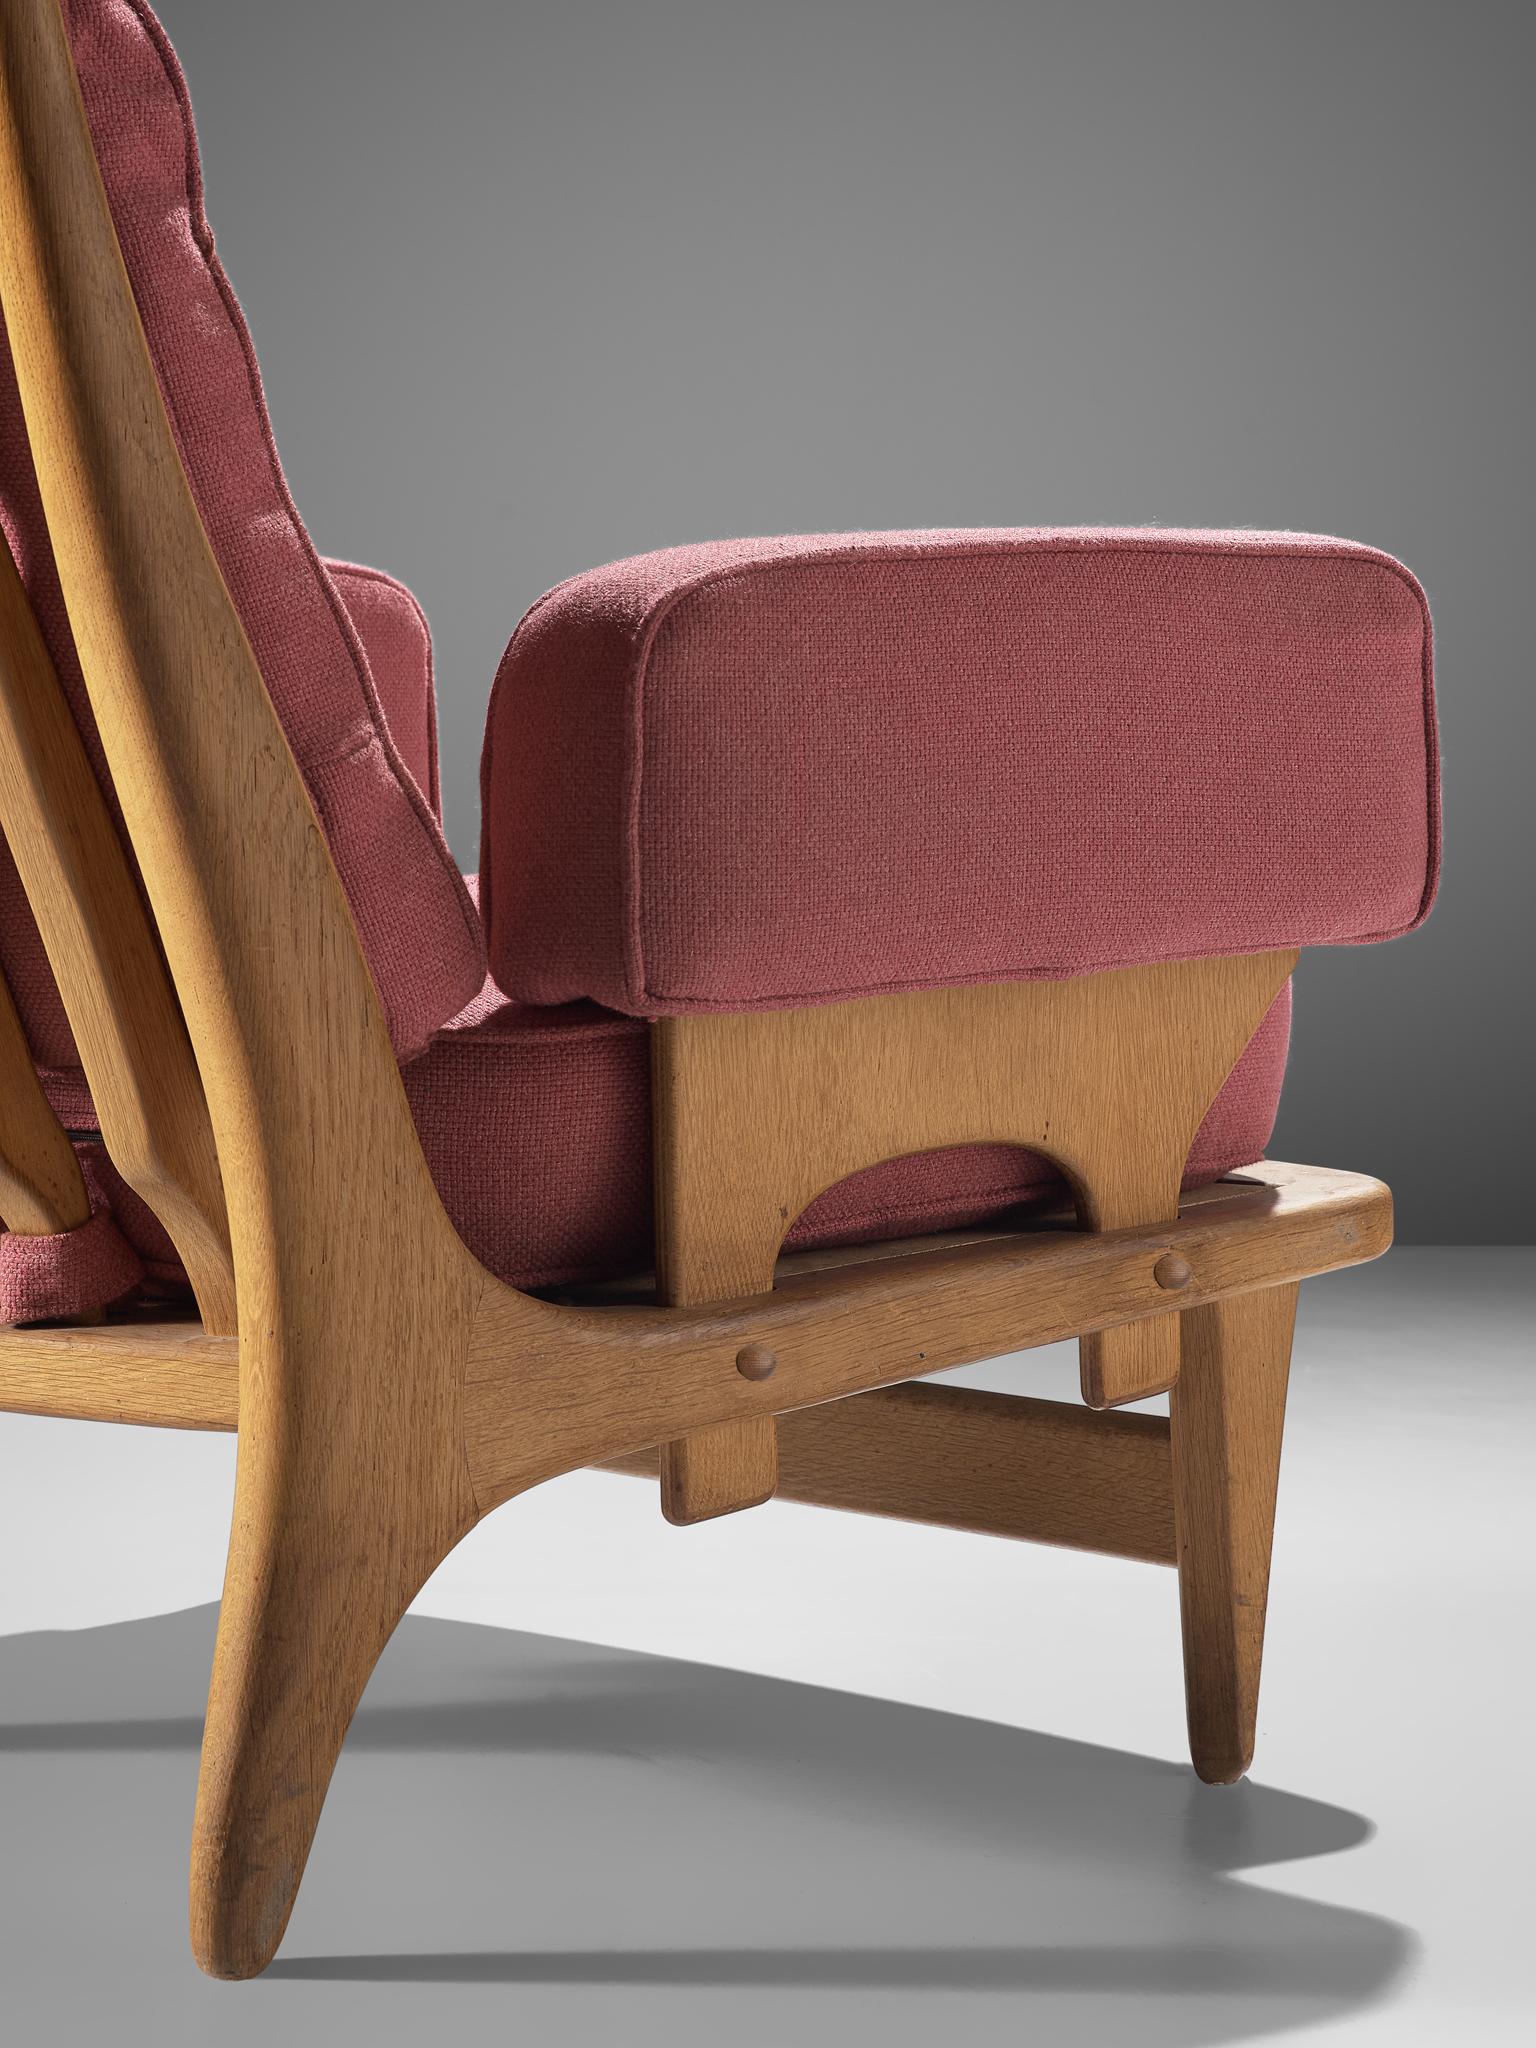 Mid-20th Century Guillerme et Chambron Lounge Chair with Pink Upholstery